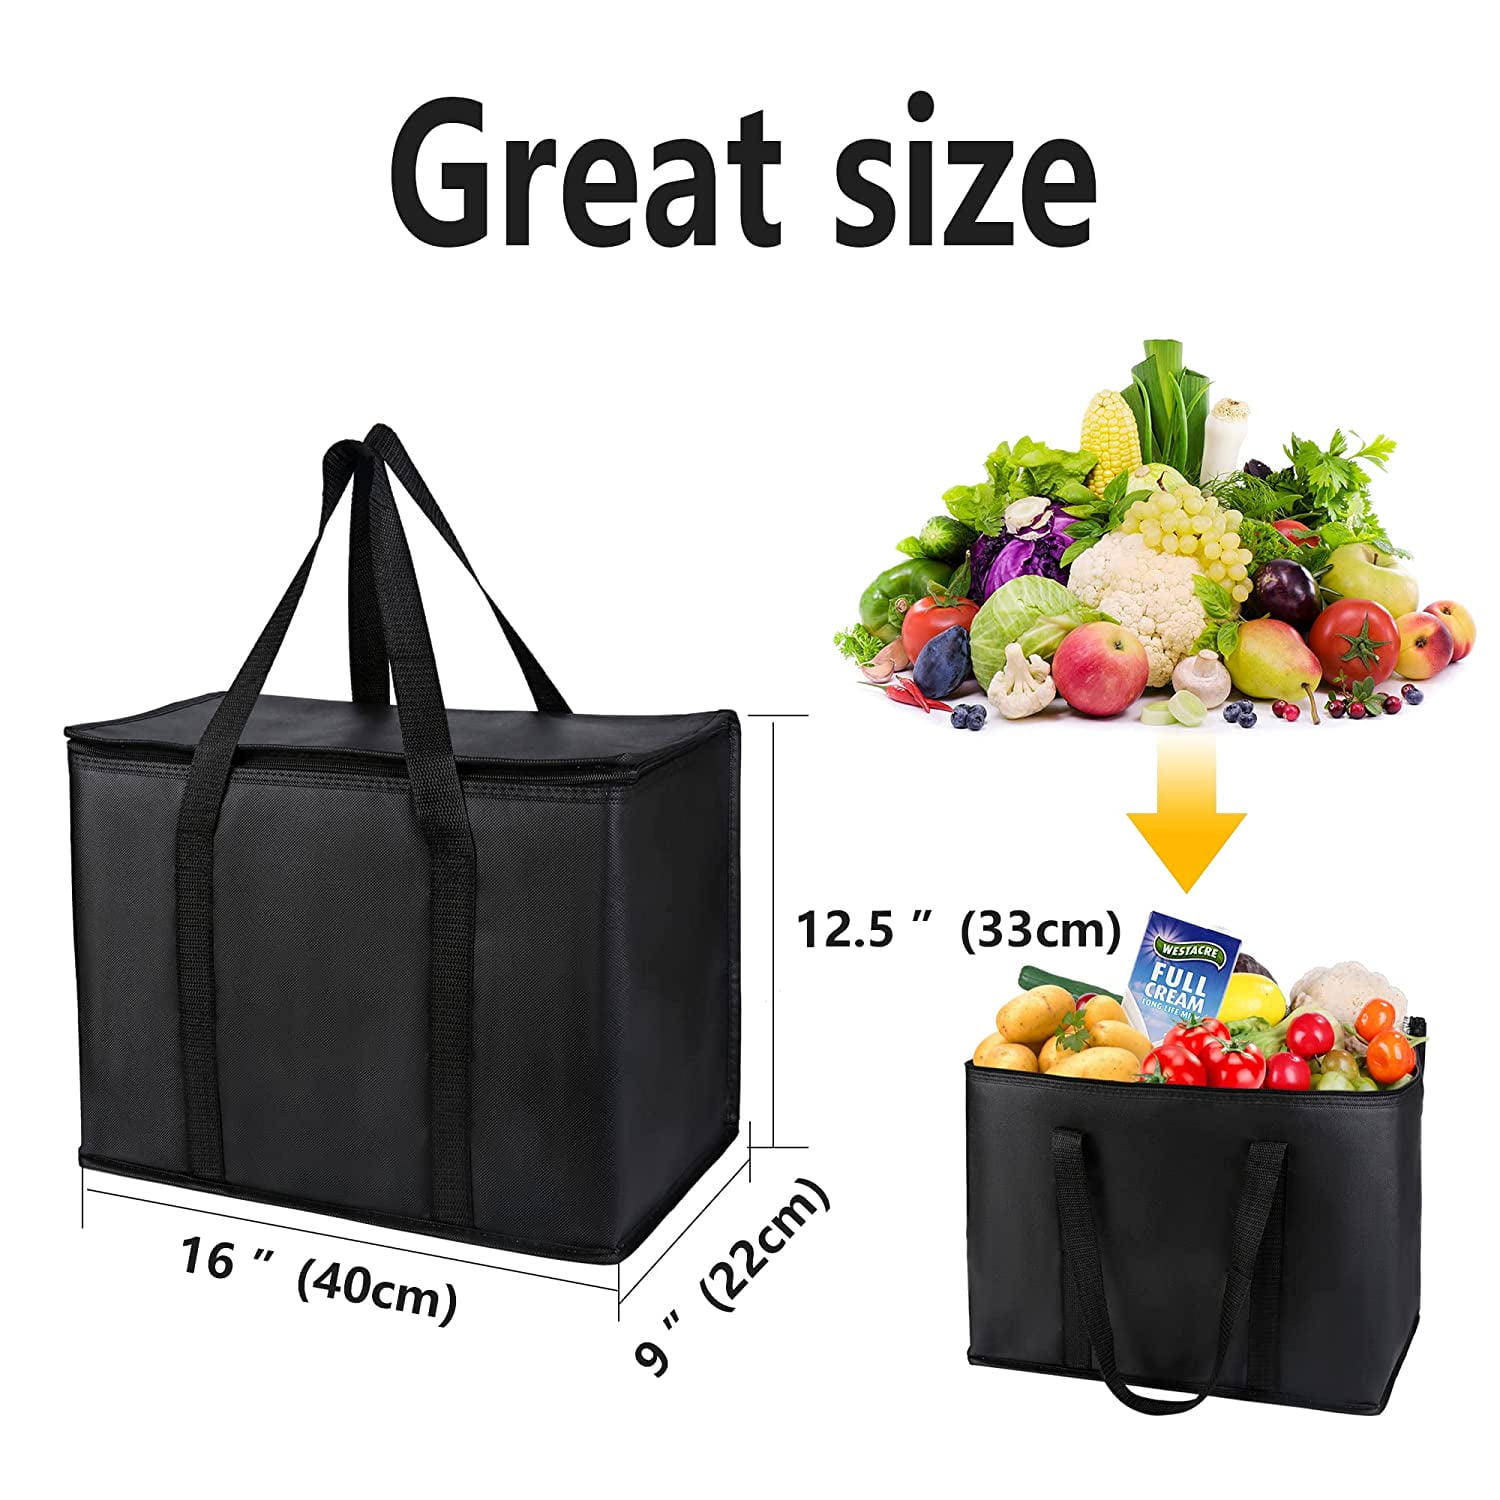 XXL-Larger Insulated Cooler Bags with Zipper Closure,Reusable Grocery  Shopping Bags Keep Food Hot or Cold,Collapsible lunch bag,Grocery  Transport,23W